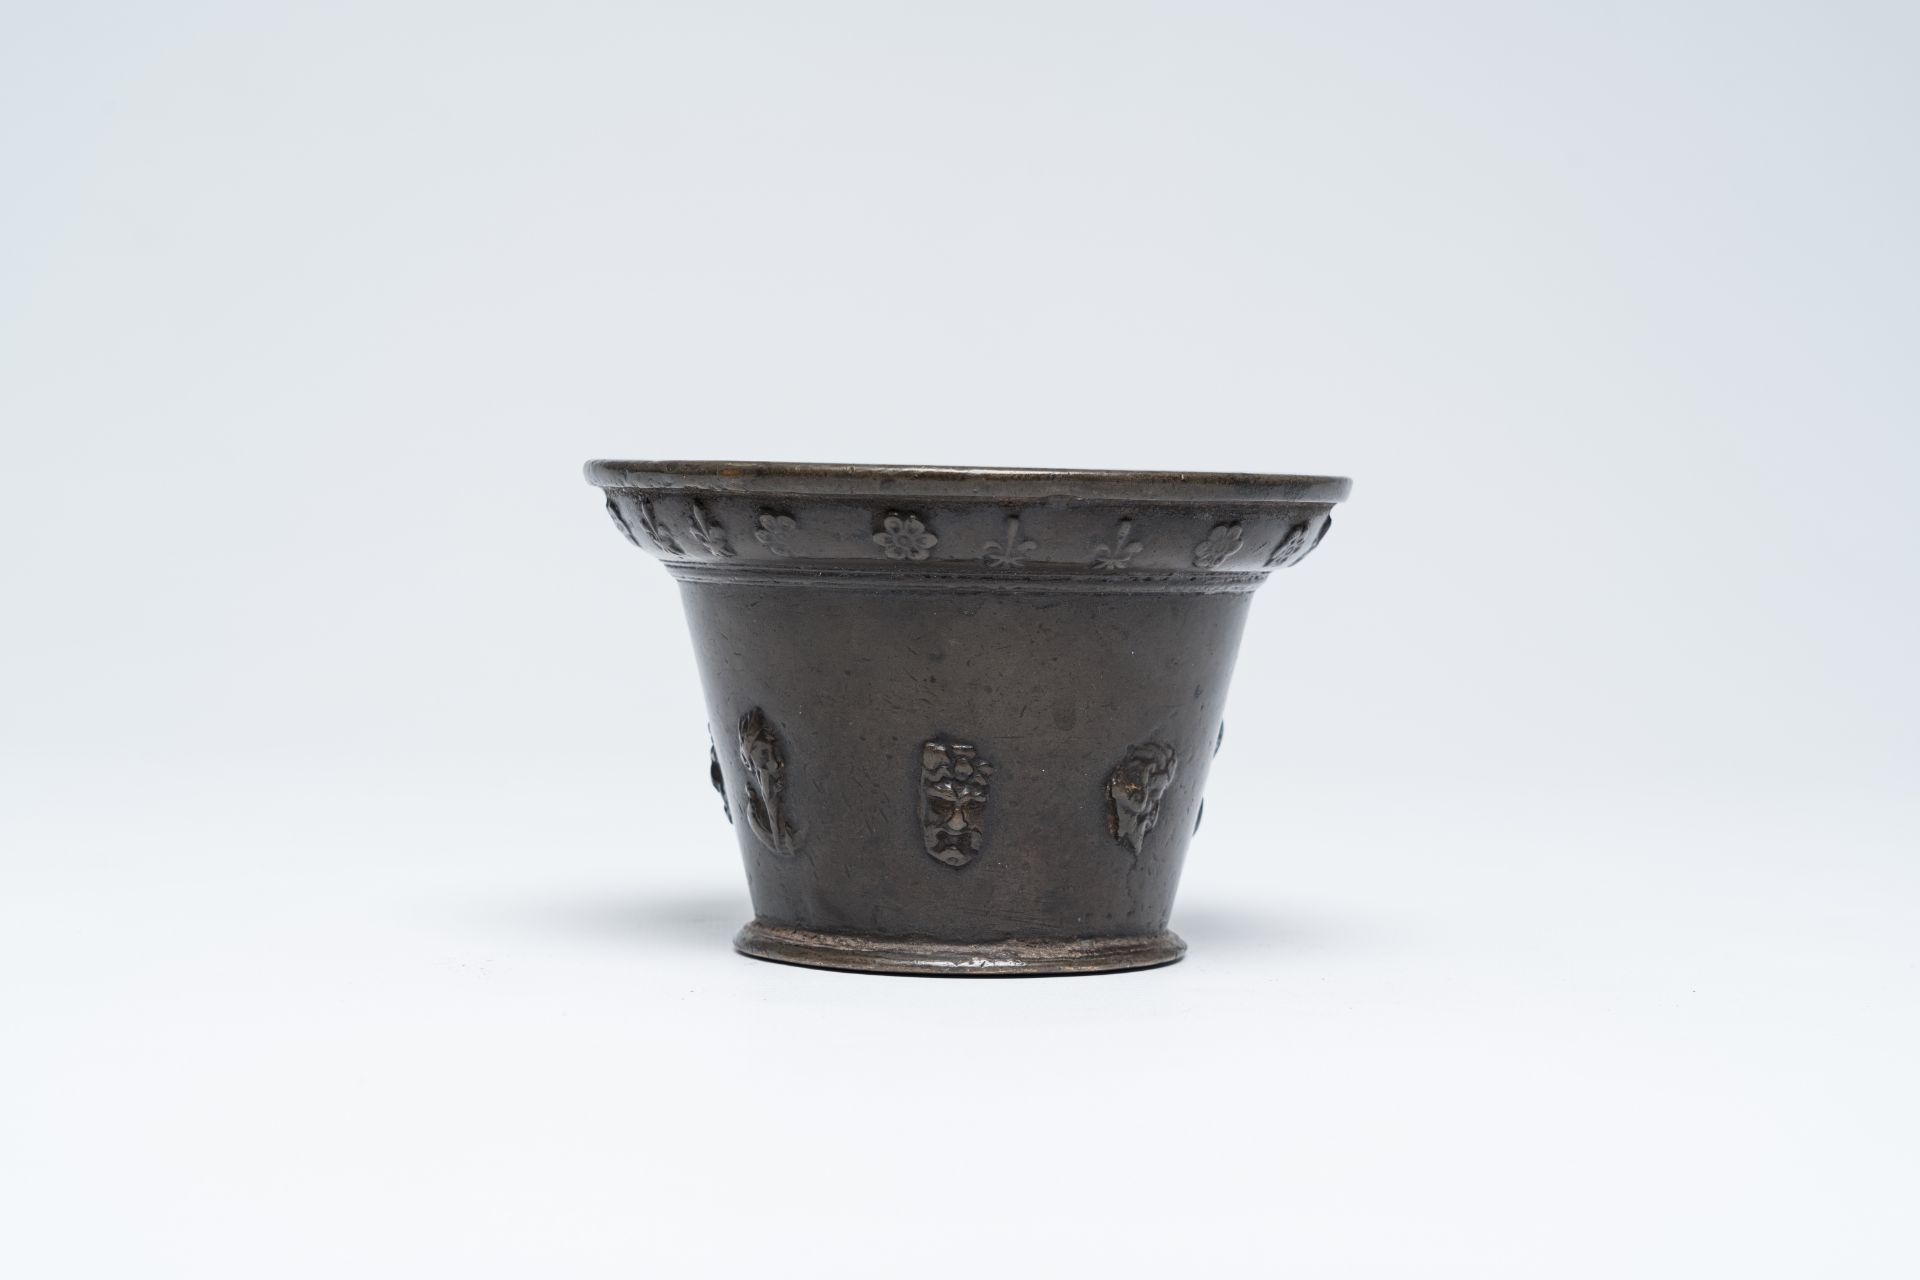 A French bronze 'mascarons' mortar, probably Lyon, 17th C. - Image 4 of 7